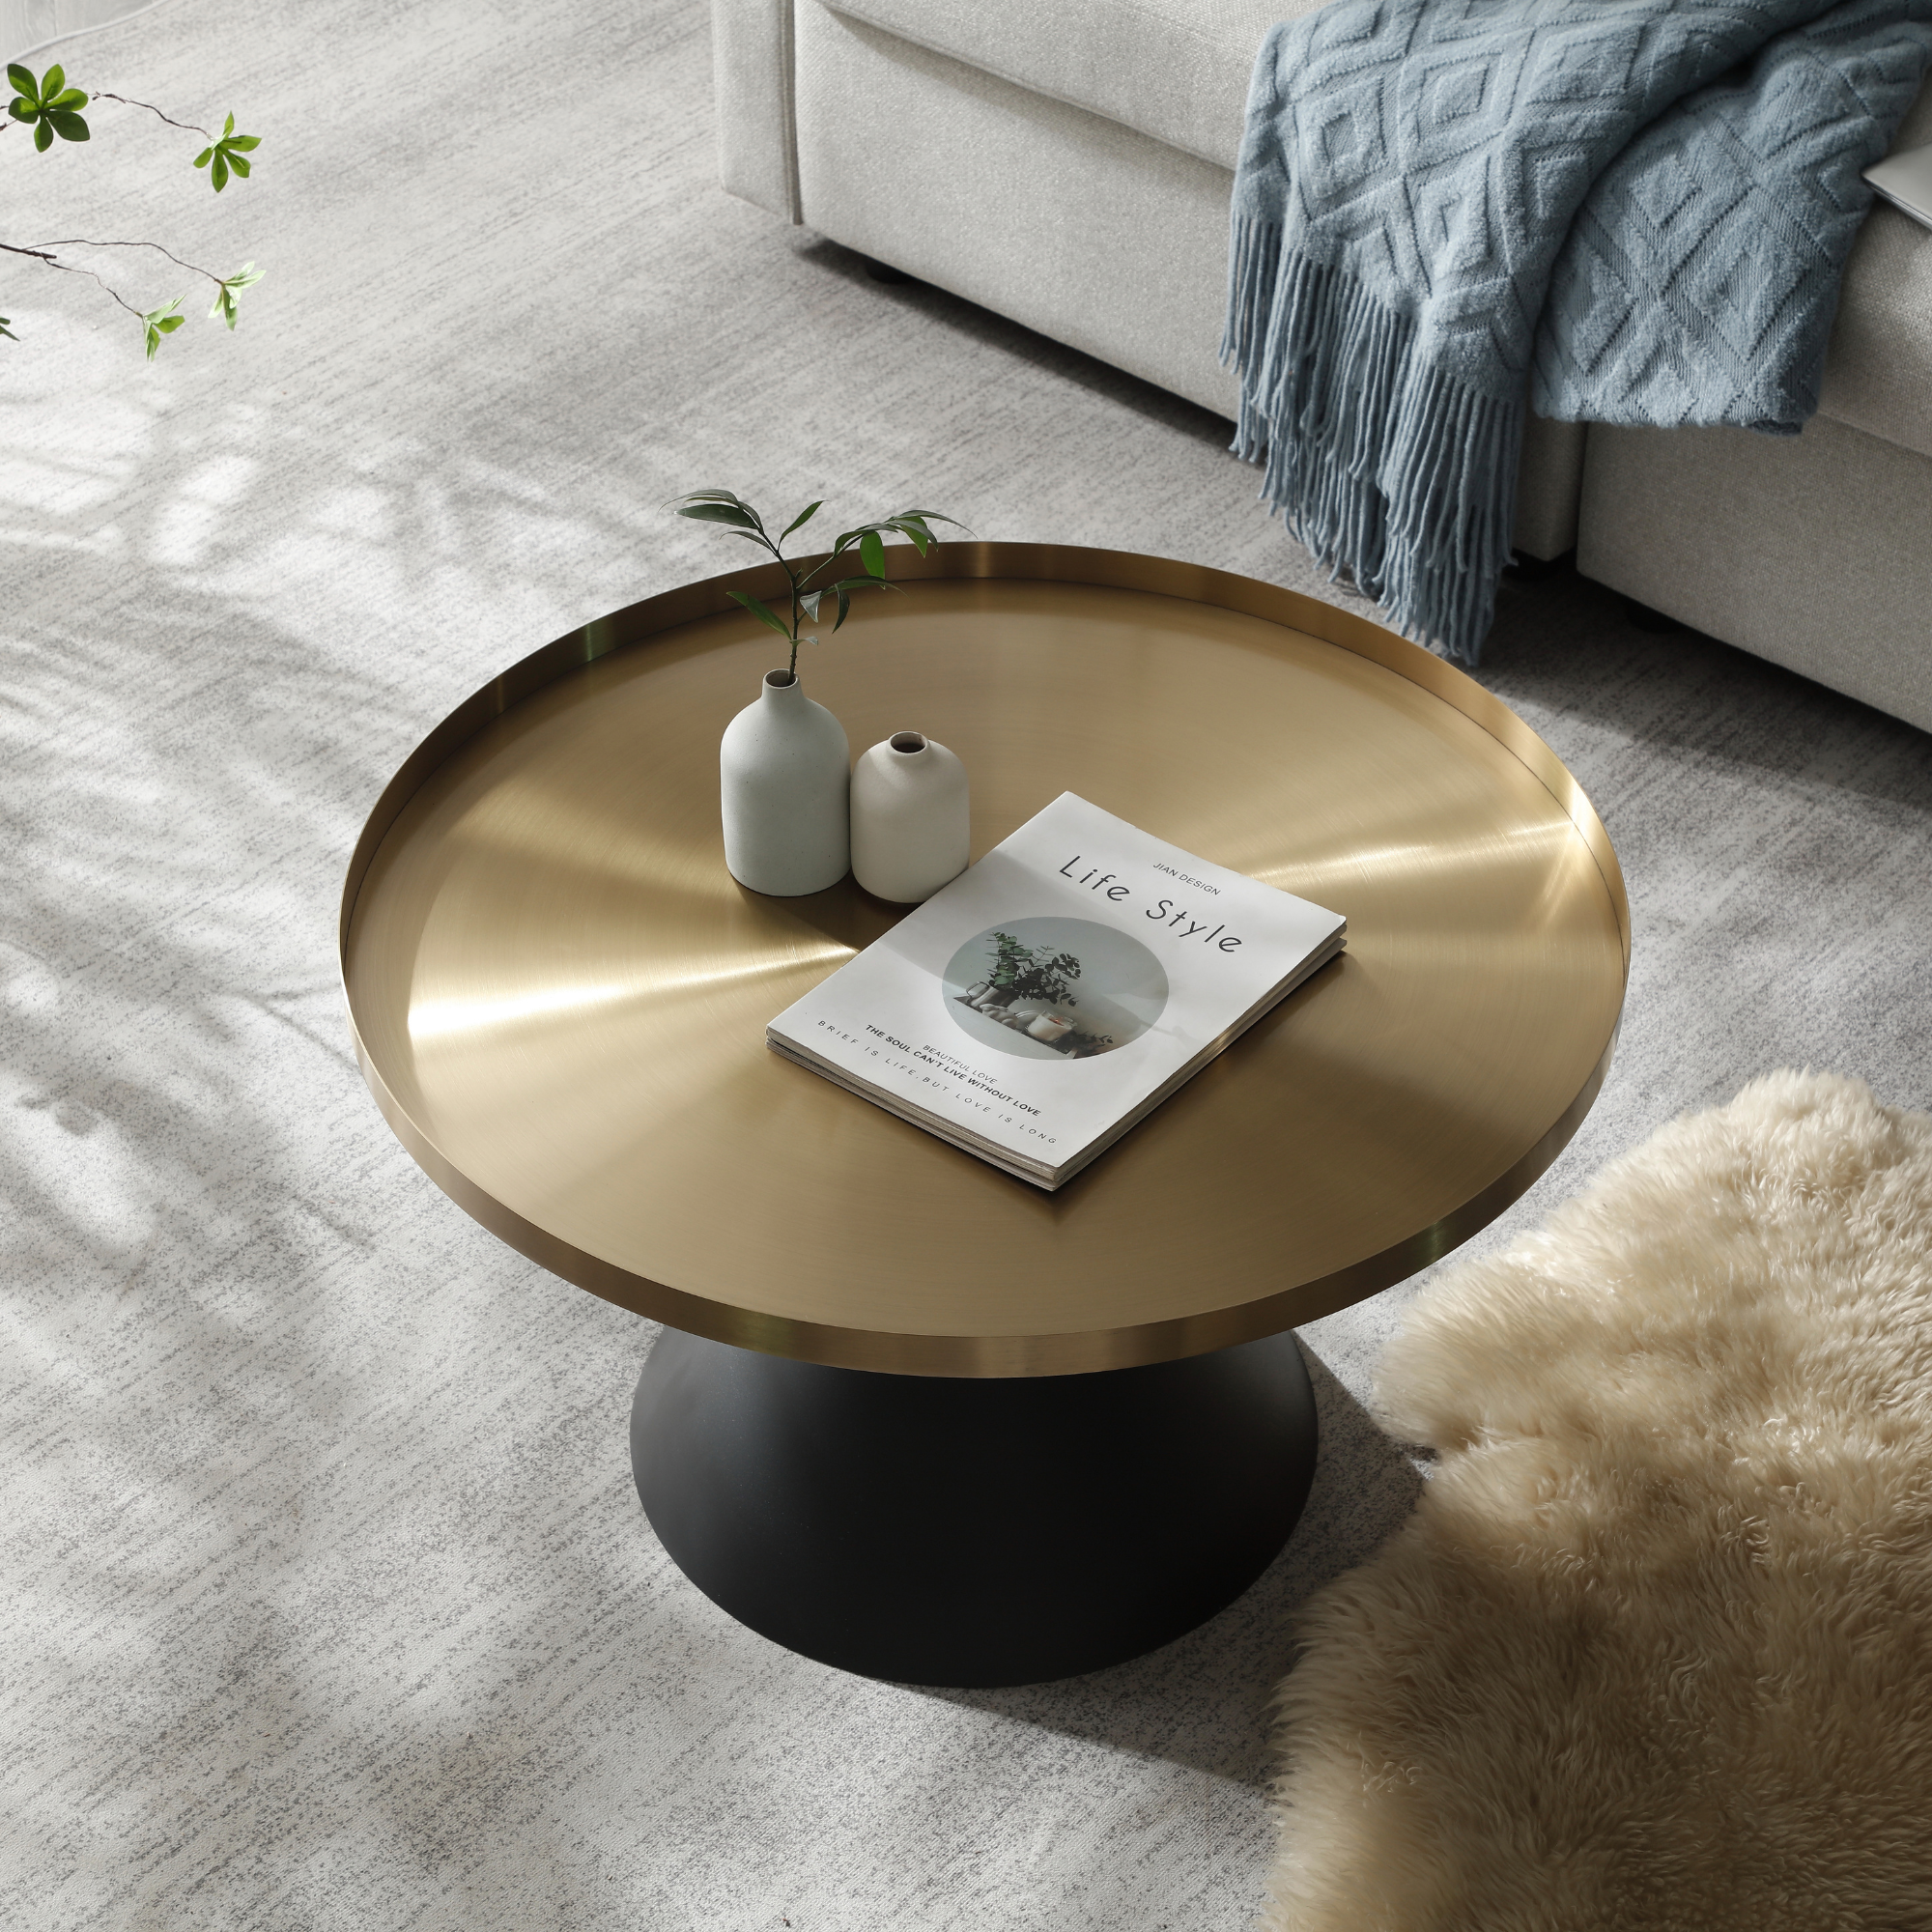 How to Make a Round Coffee Table the Centrepiece of Your Living Space